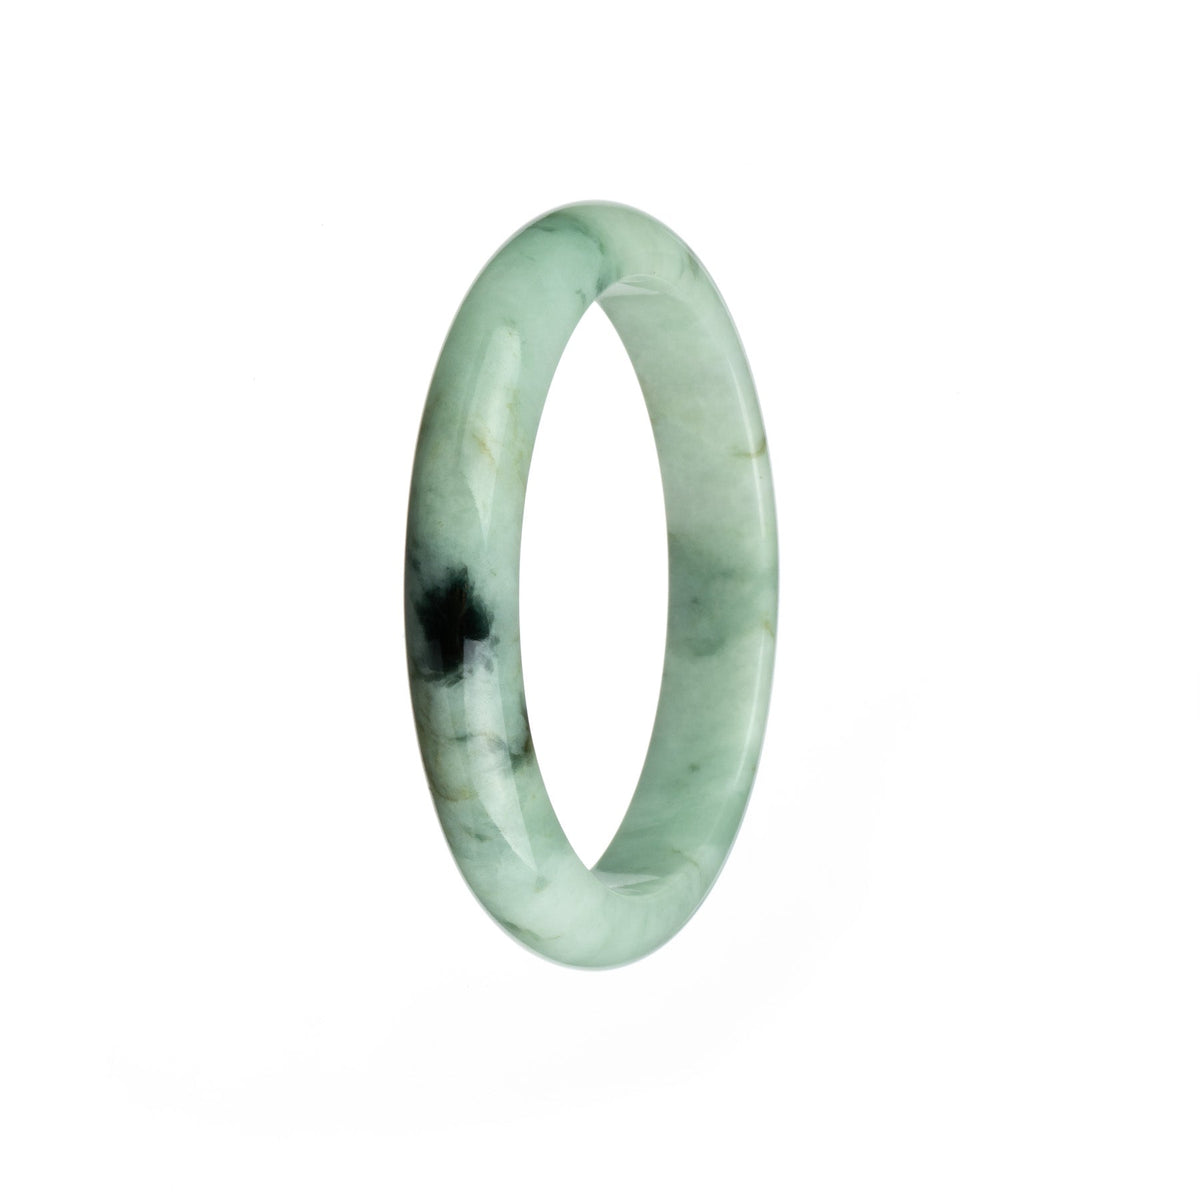 A close-up image of a genuine untreated white jadeite jade bracelet with a half-moon pattern. The bracelet measures 58mm in diameter and is sold by MAYS GEMS.